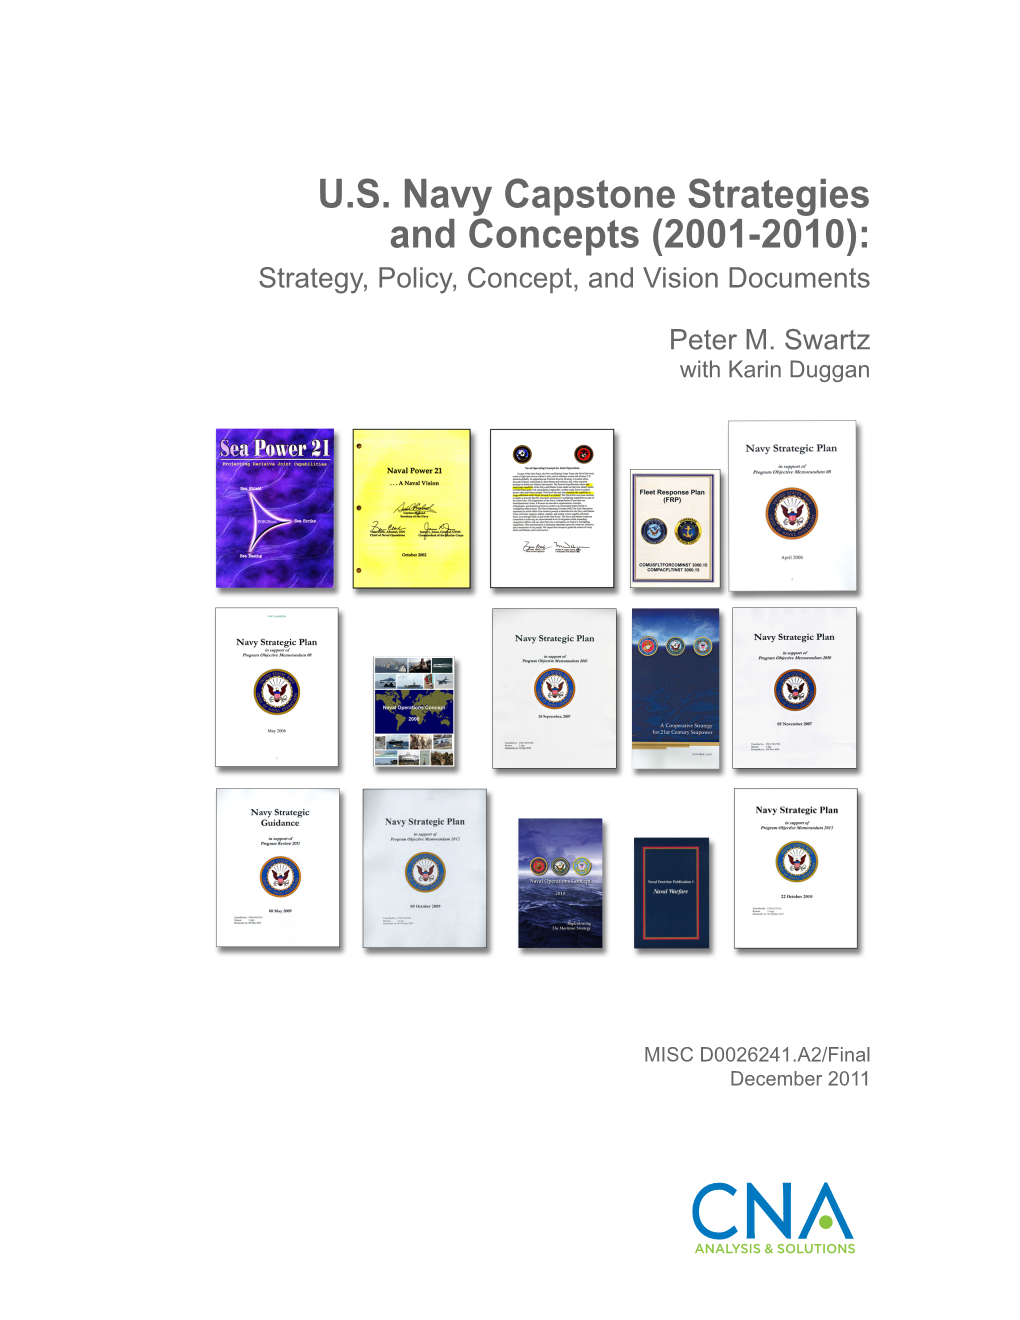 U.S. Navy Capstone Strategies and Concepts (2001-2010): Strategy, Policy, Concept, and Vision Documents